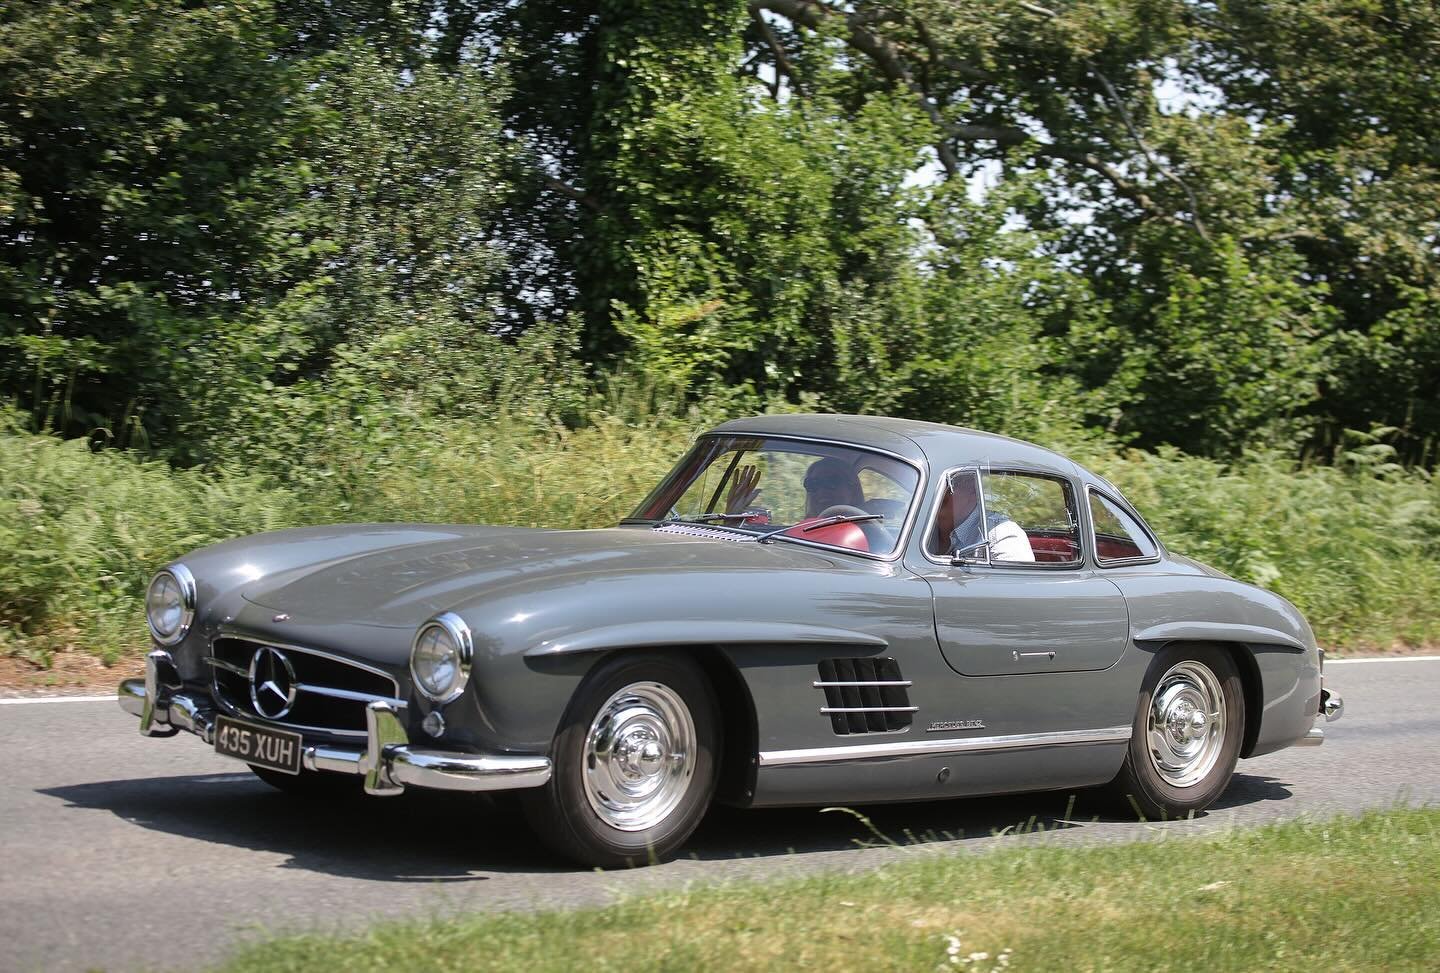 We are lucky enough that this fantastic 1955 Mercedes-Benz 300 SL Gullwing has been in the Rally lineup for several years now. This is testament to the generosity and kindness of its owner who is so keen for others to experience the pleasure of drivi